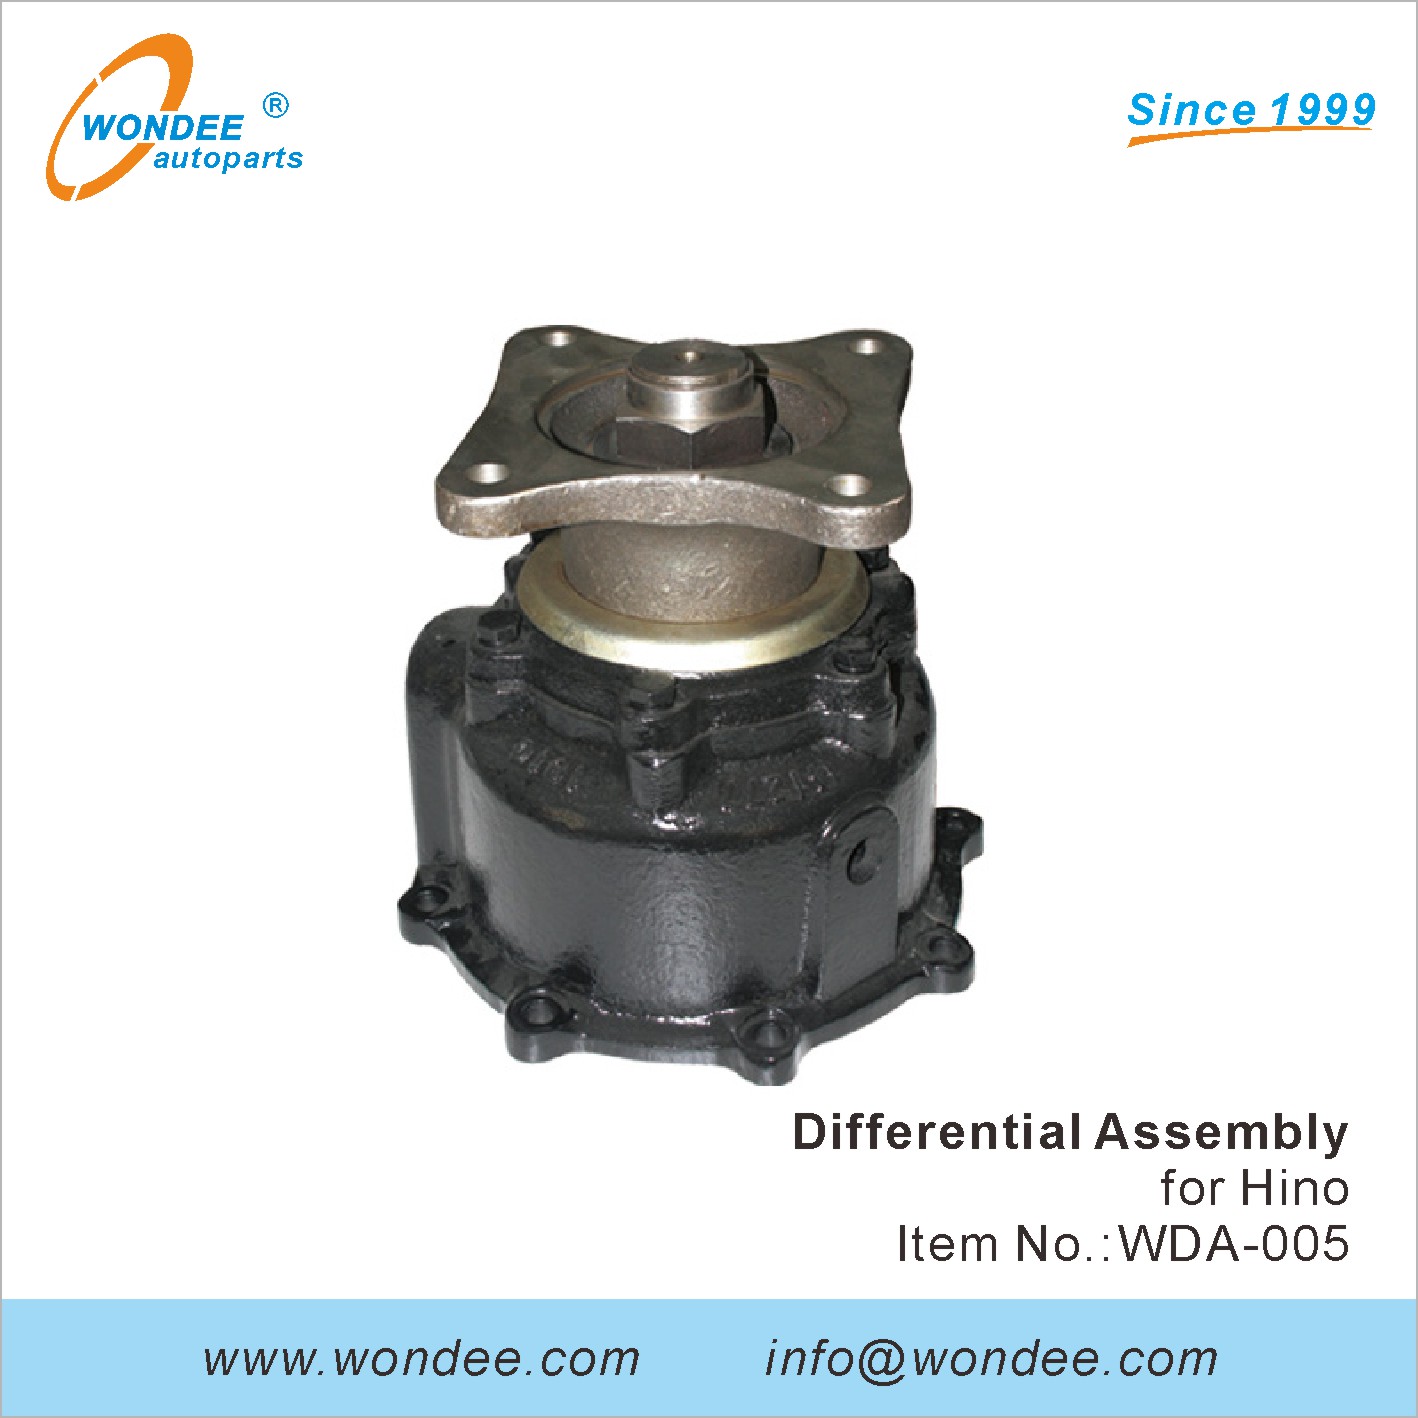 WONDEE differential assembly (5)